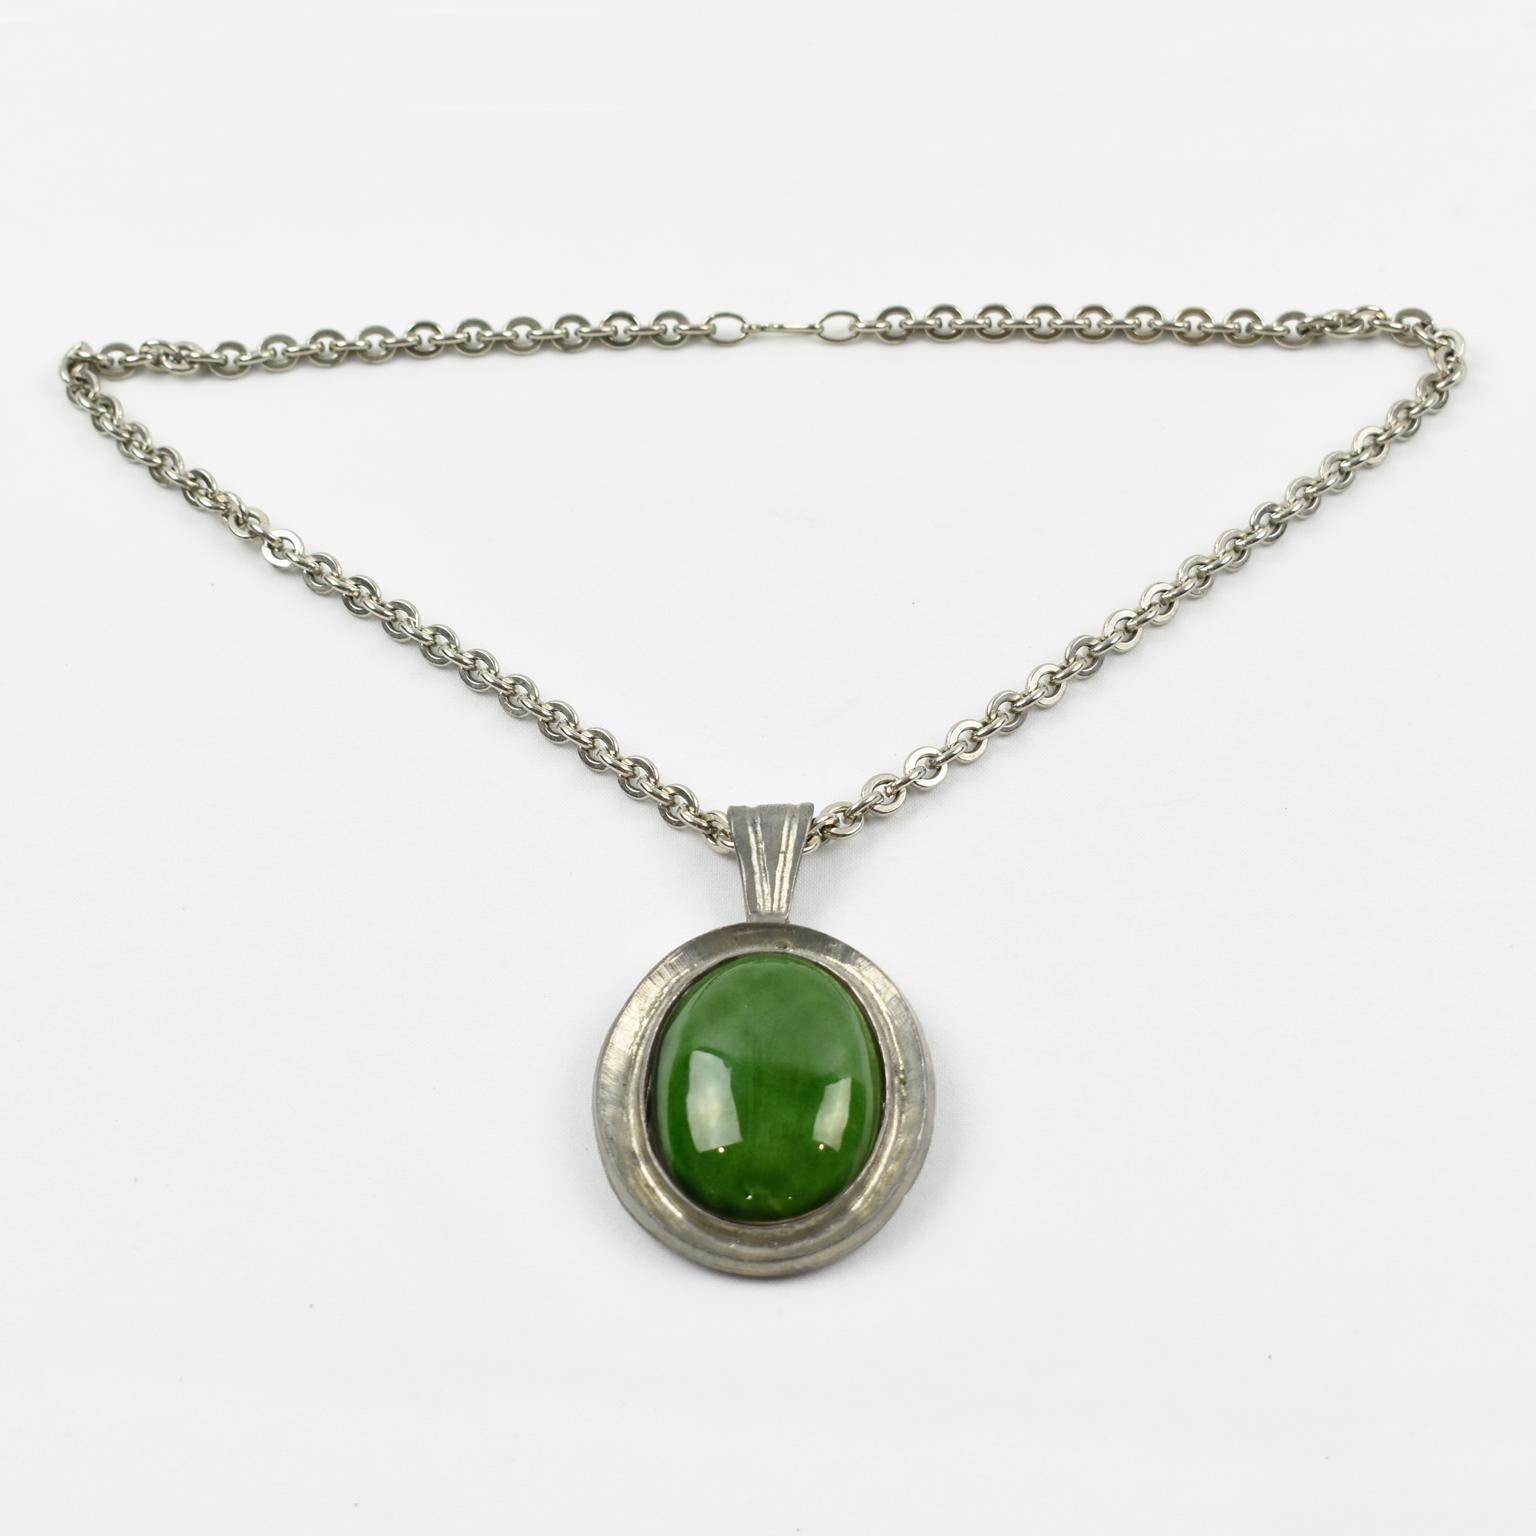 Space Age Pewter Necklace with Green Ceramic Pendant In Excellent Condition For Sale In Atlanta, GA